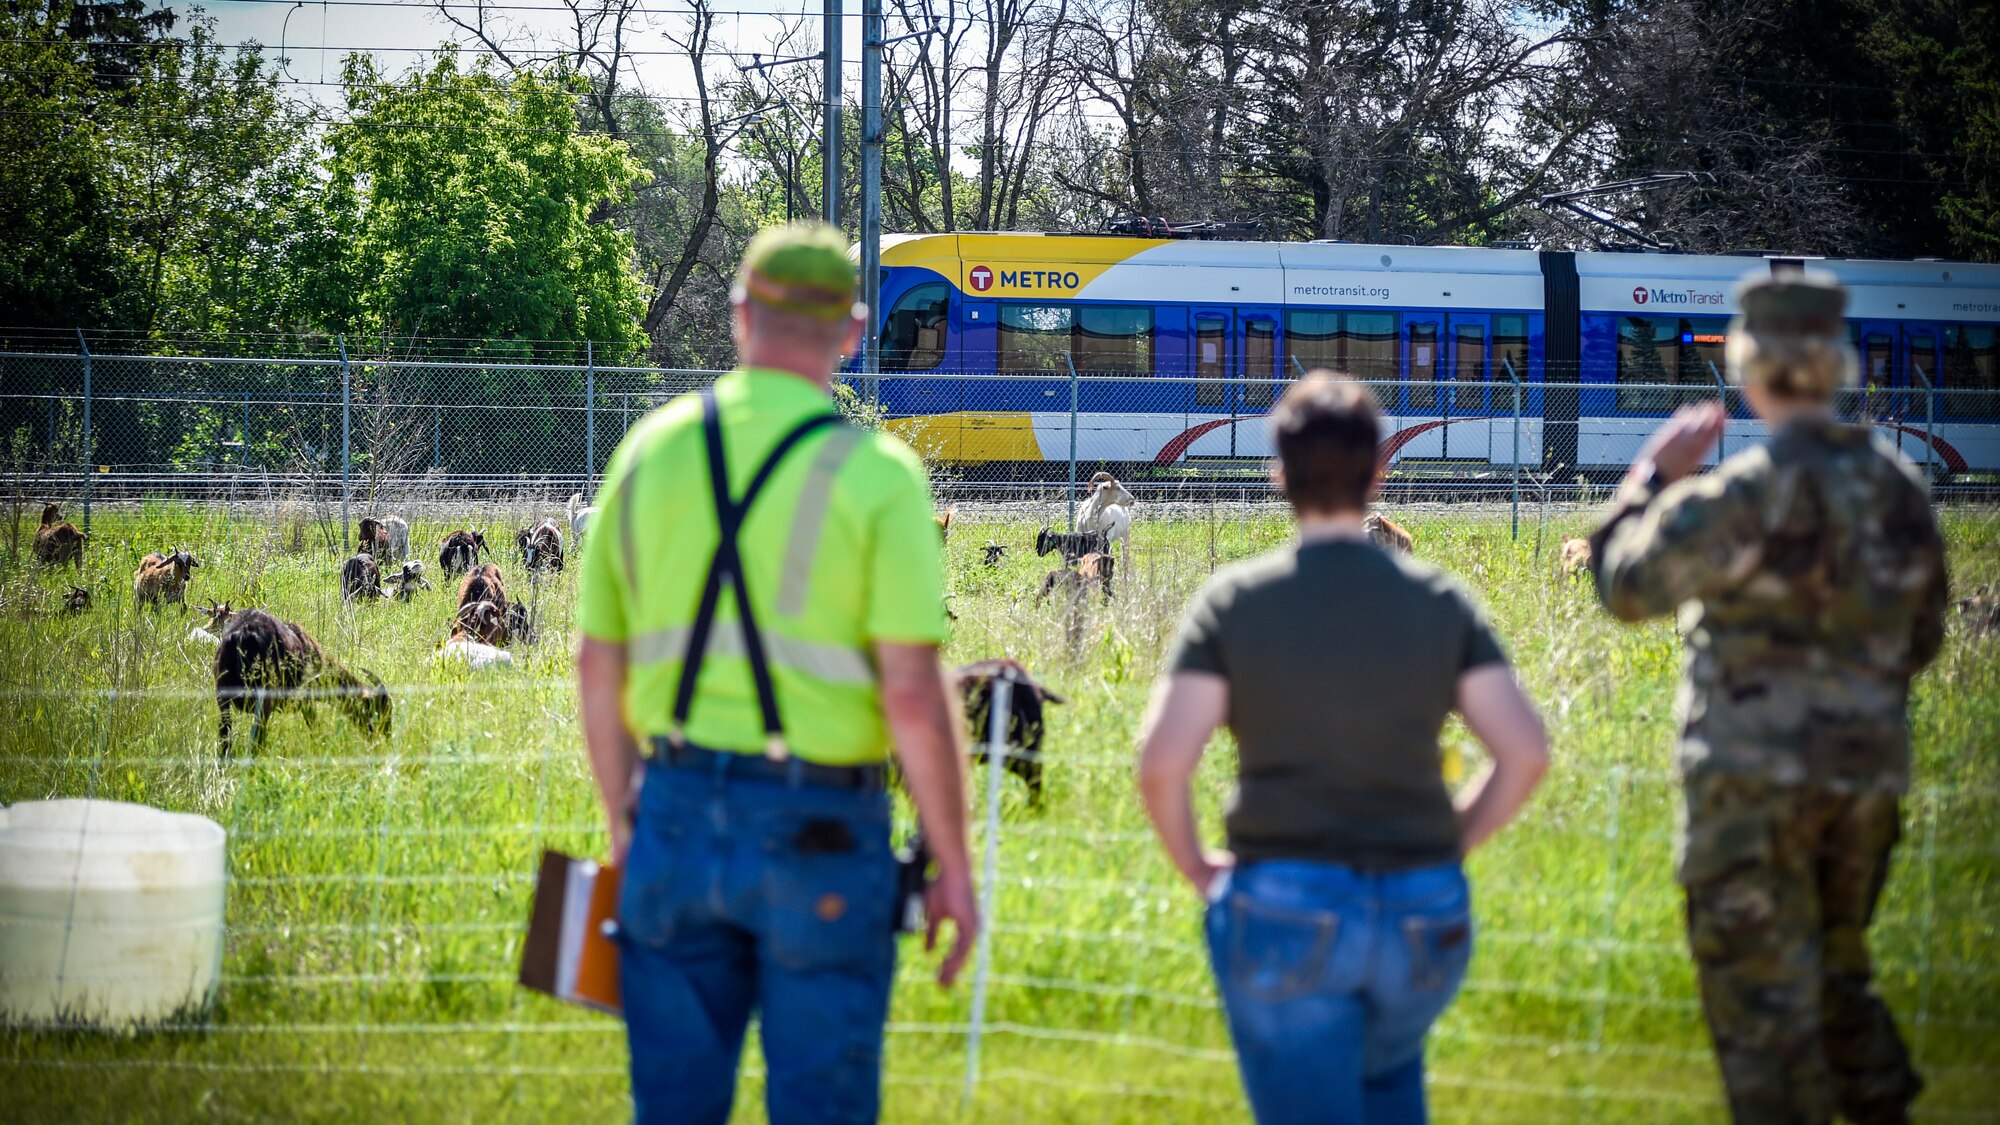 More than 75 goats were brought in to maintain a natural prairie grass restoration project at the 133rd Airlift Wing in St. Paul, Minn., June 5, 2019.